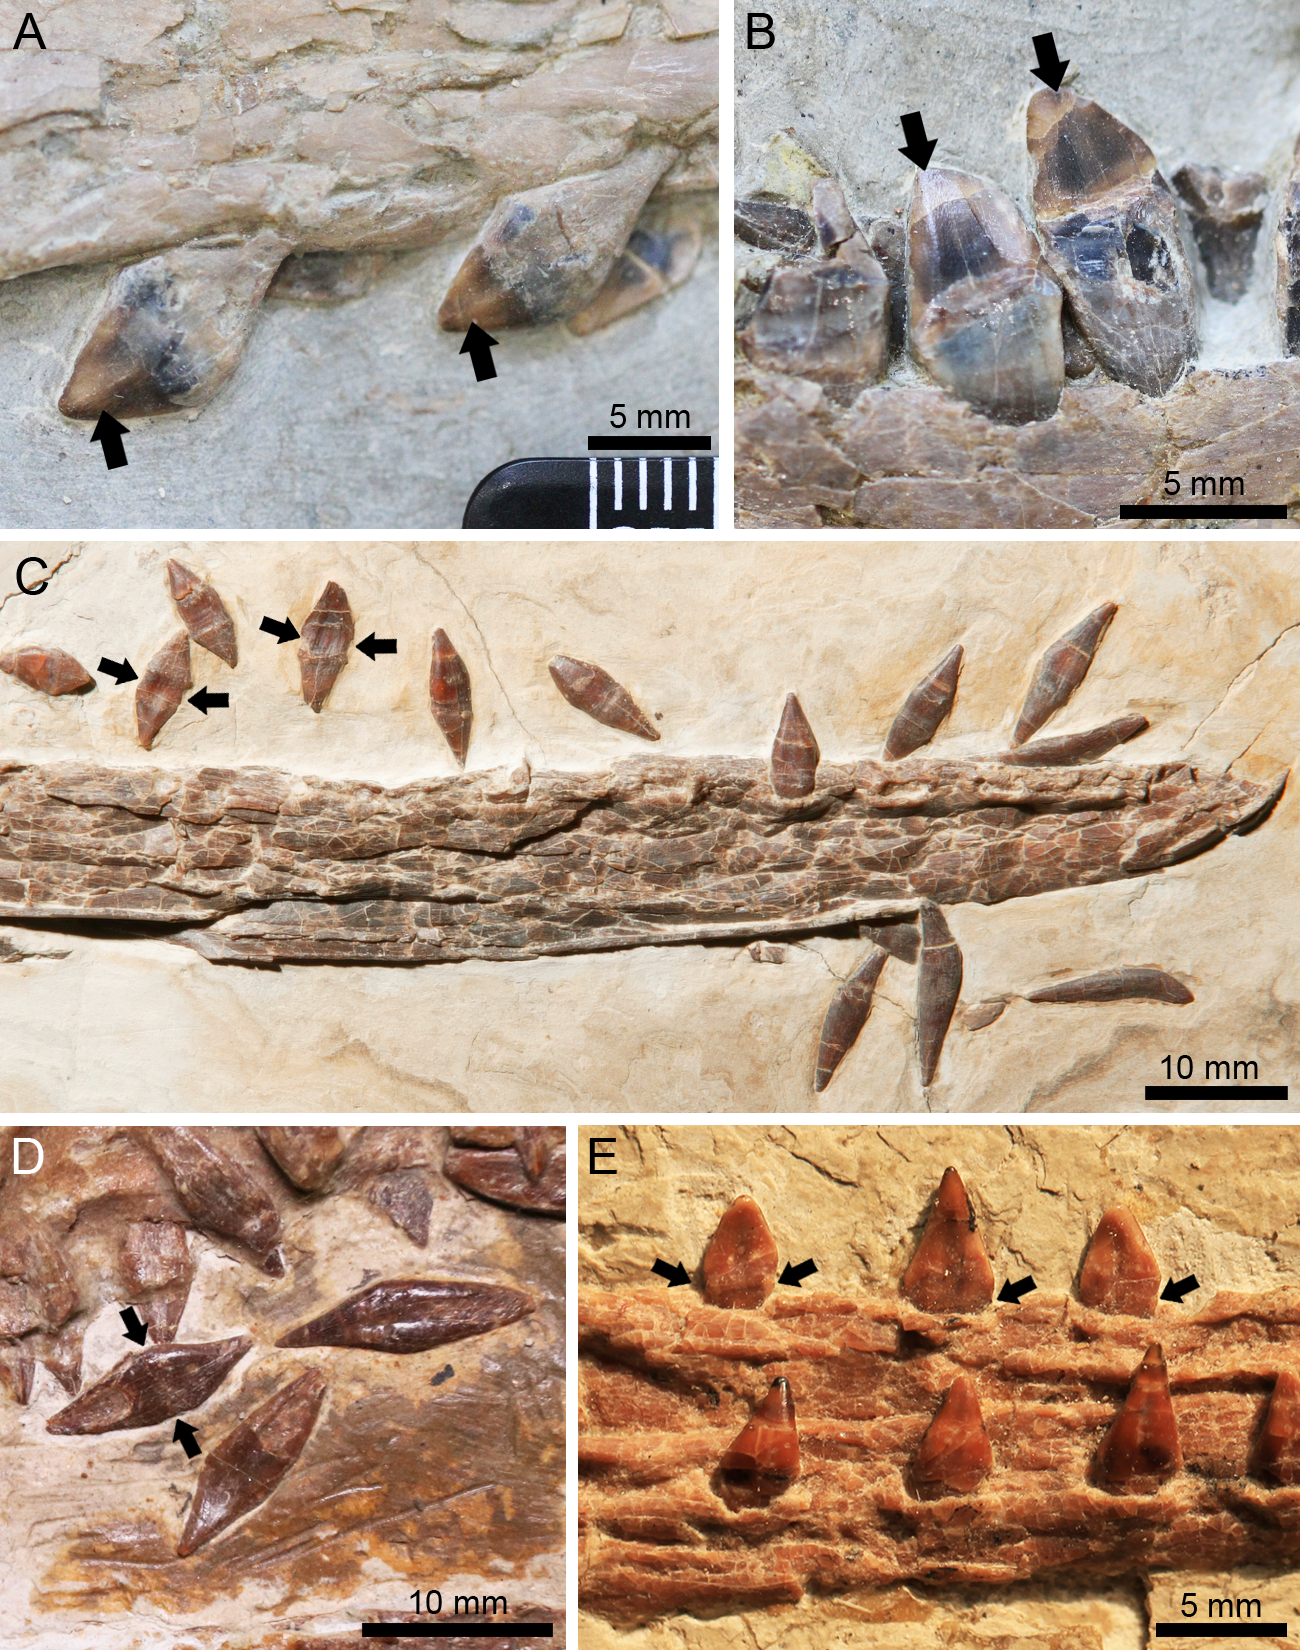 Nurhachius luei, a new istiodactylid pterosaur (Pterosauria,  Pterodactyloidea) from the Early Cretaceous Jiufotang Formation of Chaoyang  City, Liaoning Province (China) and comments on the Istiodactylidae [PeerJ]